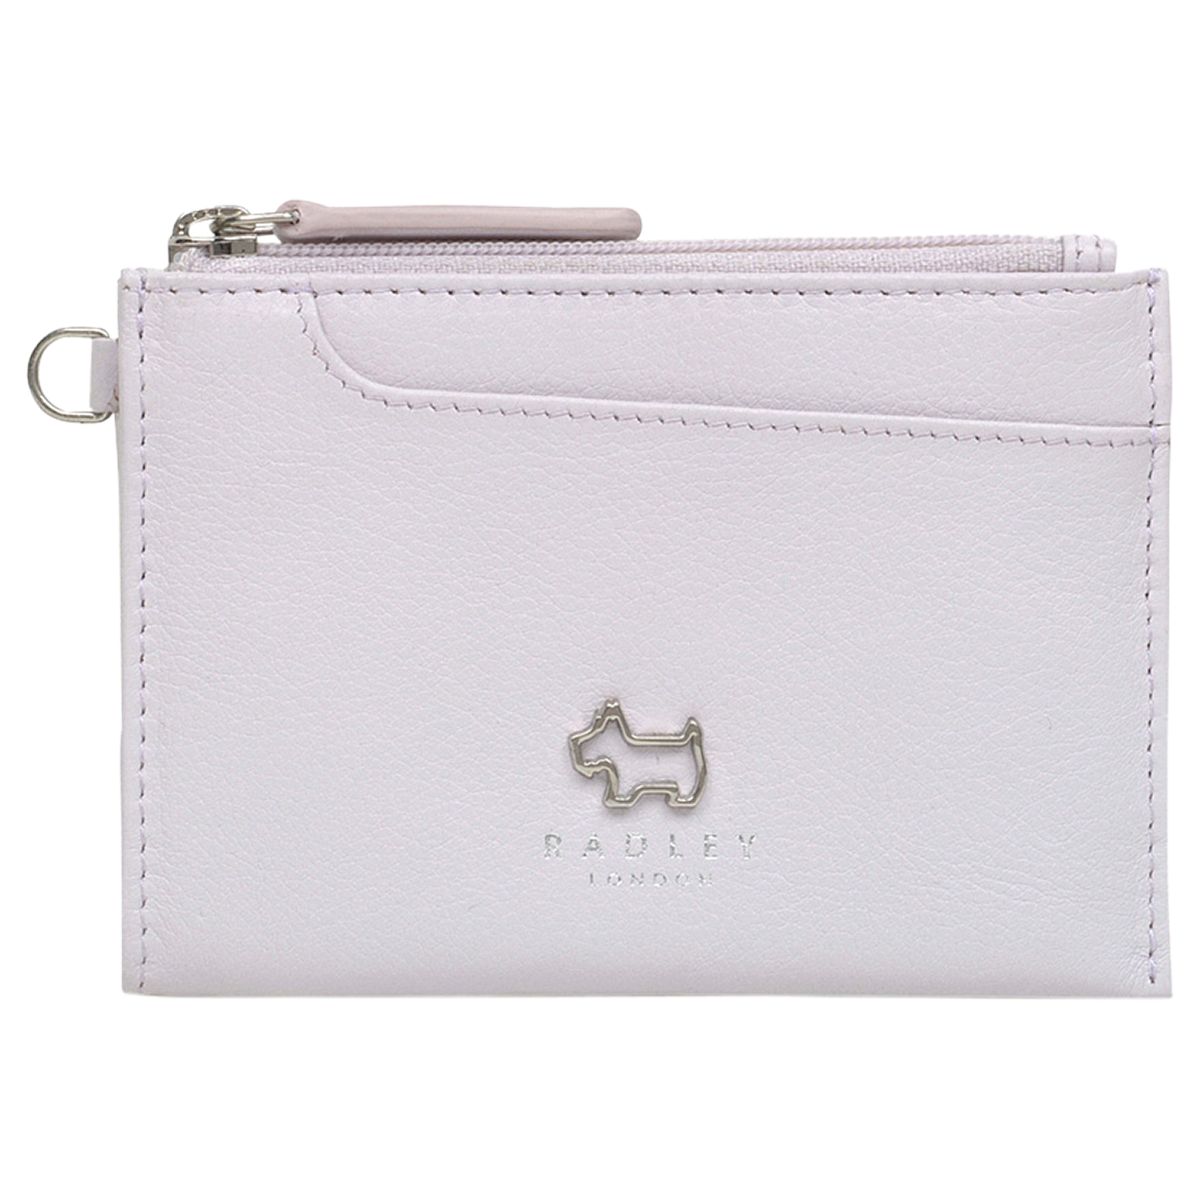 Radley Pockets Leather Small Coin Purse at John Lewis & Partners